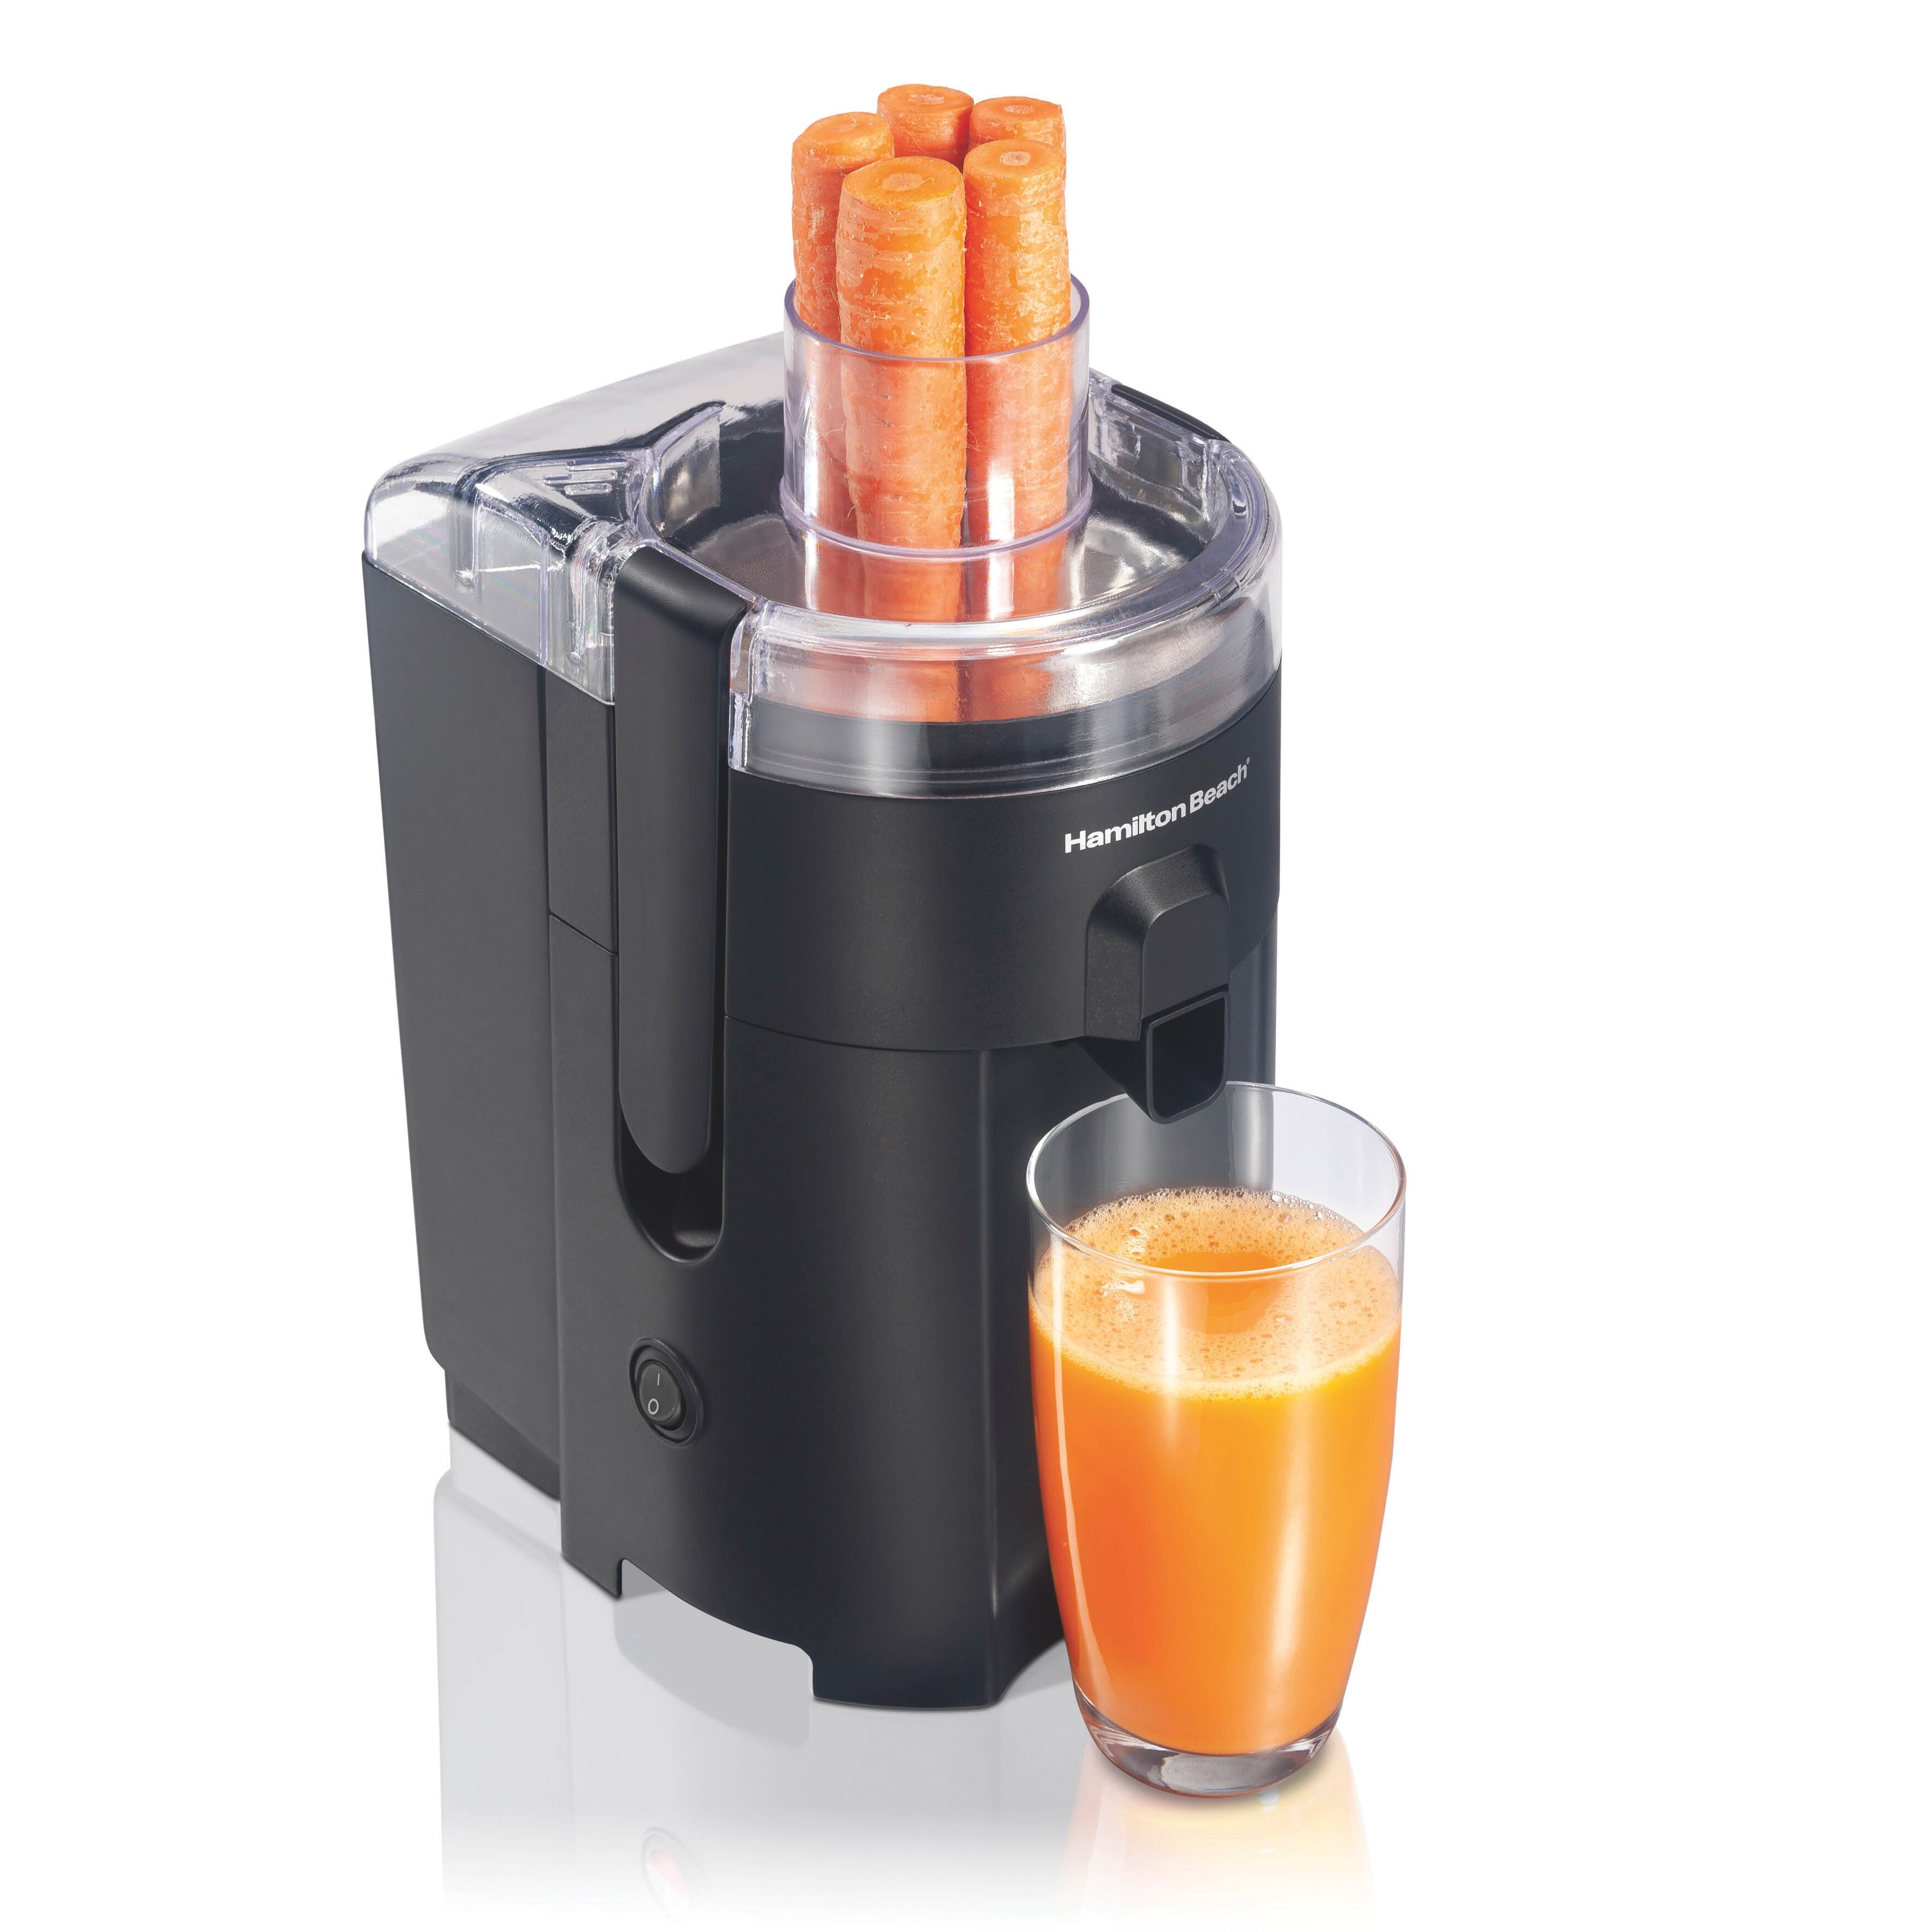 https://ak1.ostkcdn.com/images/products/is/images/direct/79787798451cf10c722d5e4360192851f979fdfc/HealthSmart-Compact-Juice-Extractor.jpg